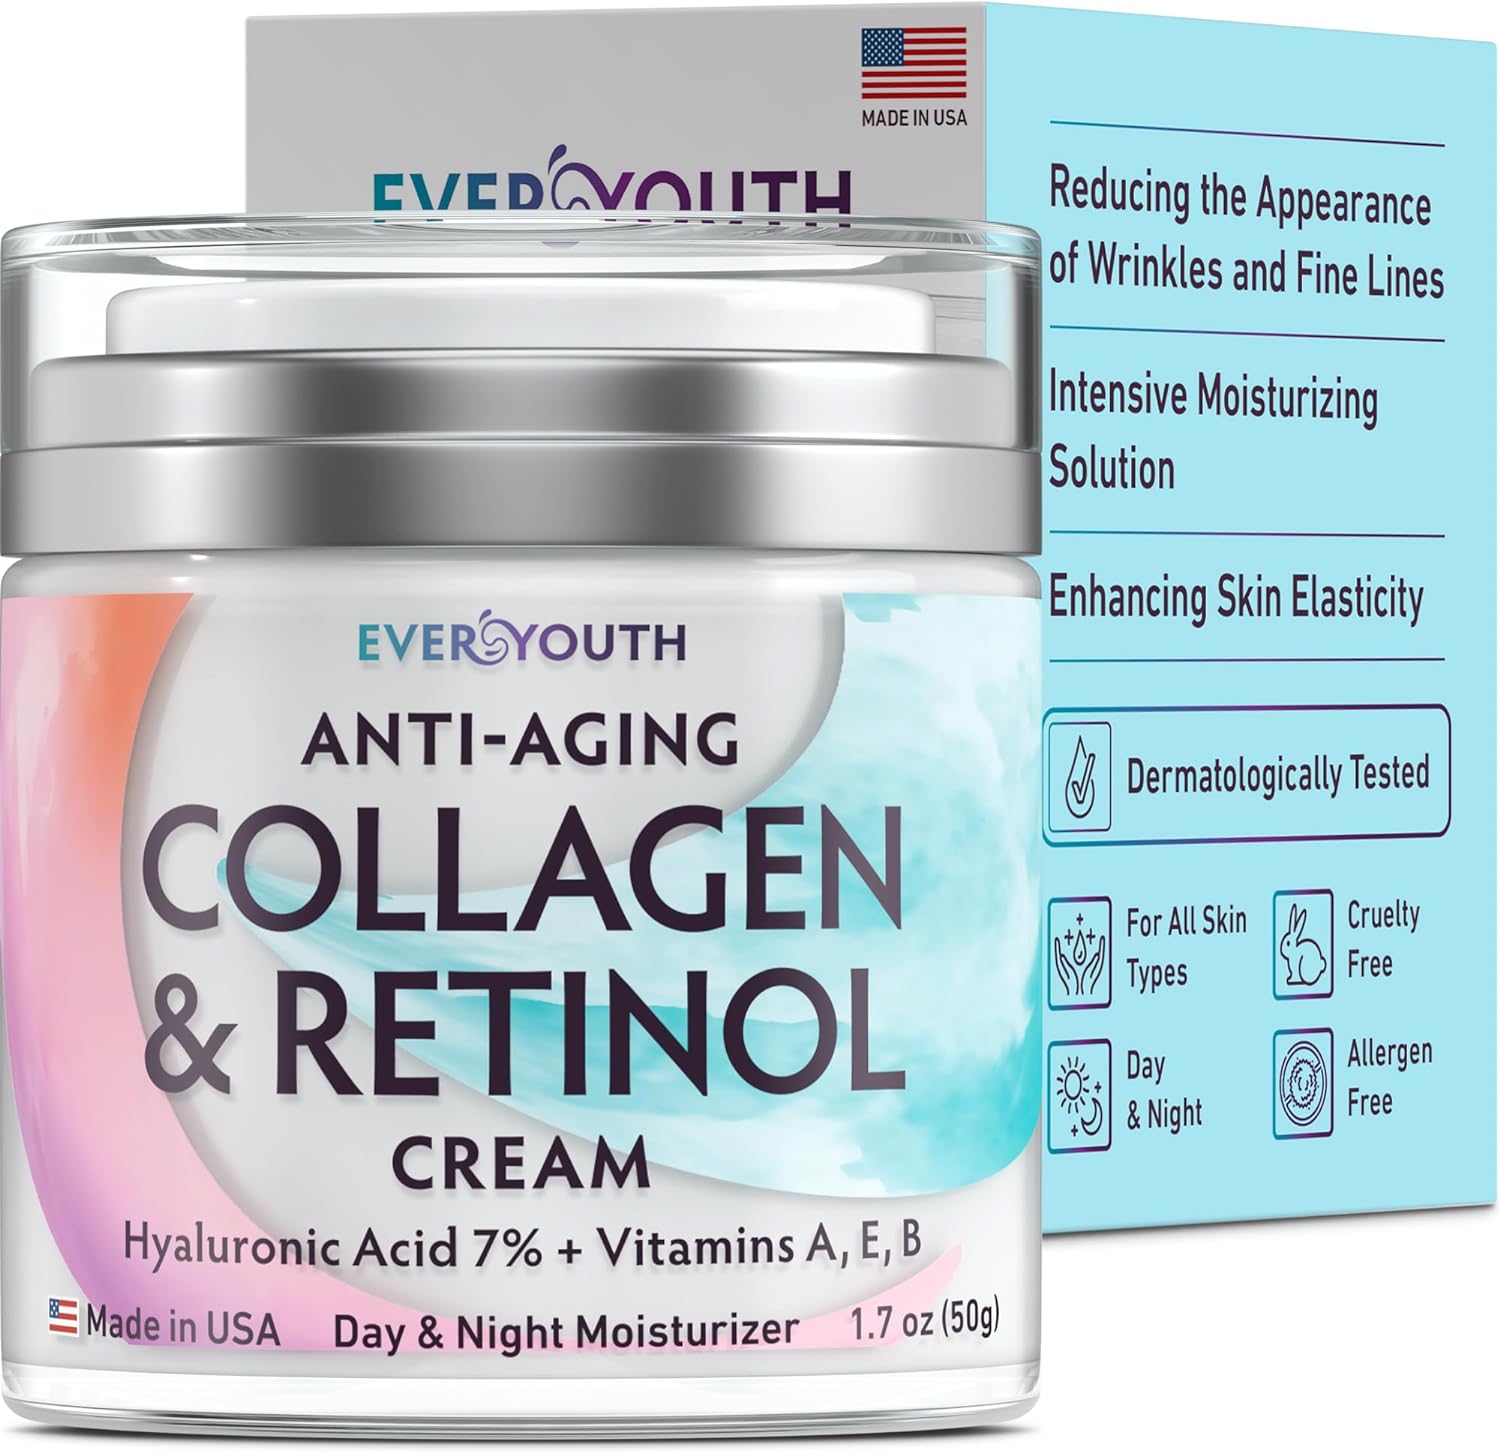 EVERYOUTH Collagen Retinol Face Moisturizer with Hyaluronic Acid - Moisturizer Face Cream - Made in USA - Day  Night Cream for Women - Anti Wrinkle Cream for Face - Daily Facial Moisturizer - 1.7oz